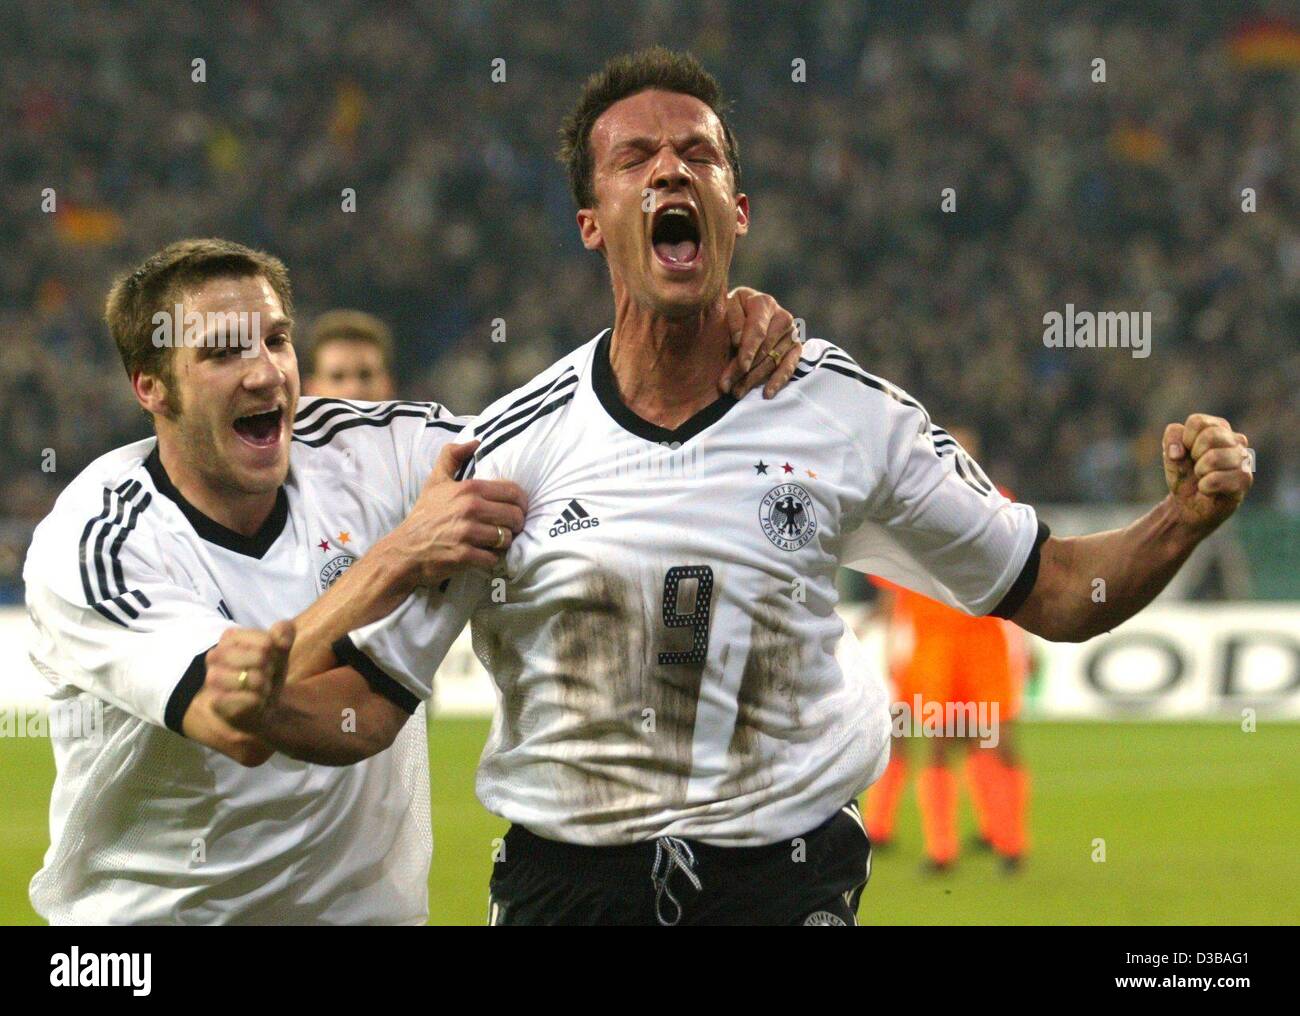 (dpa) - German goal scorer Fredi Bobic (R) jubilates with his team mate Torsten Frings during the international friendly soccer match Germany against Netherlands in Gelsenkirchen, Germany, 20 November 2002. Holland went on to win 3-1. It is Germany's first defeat since the World Cup final. Stock Photo